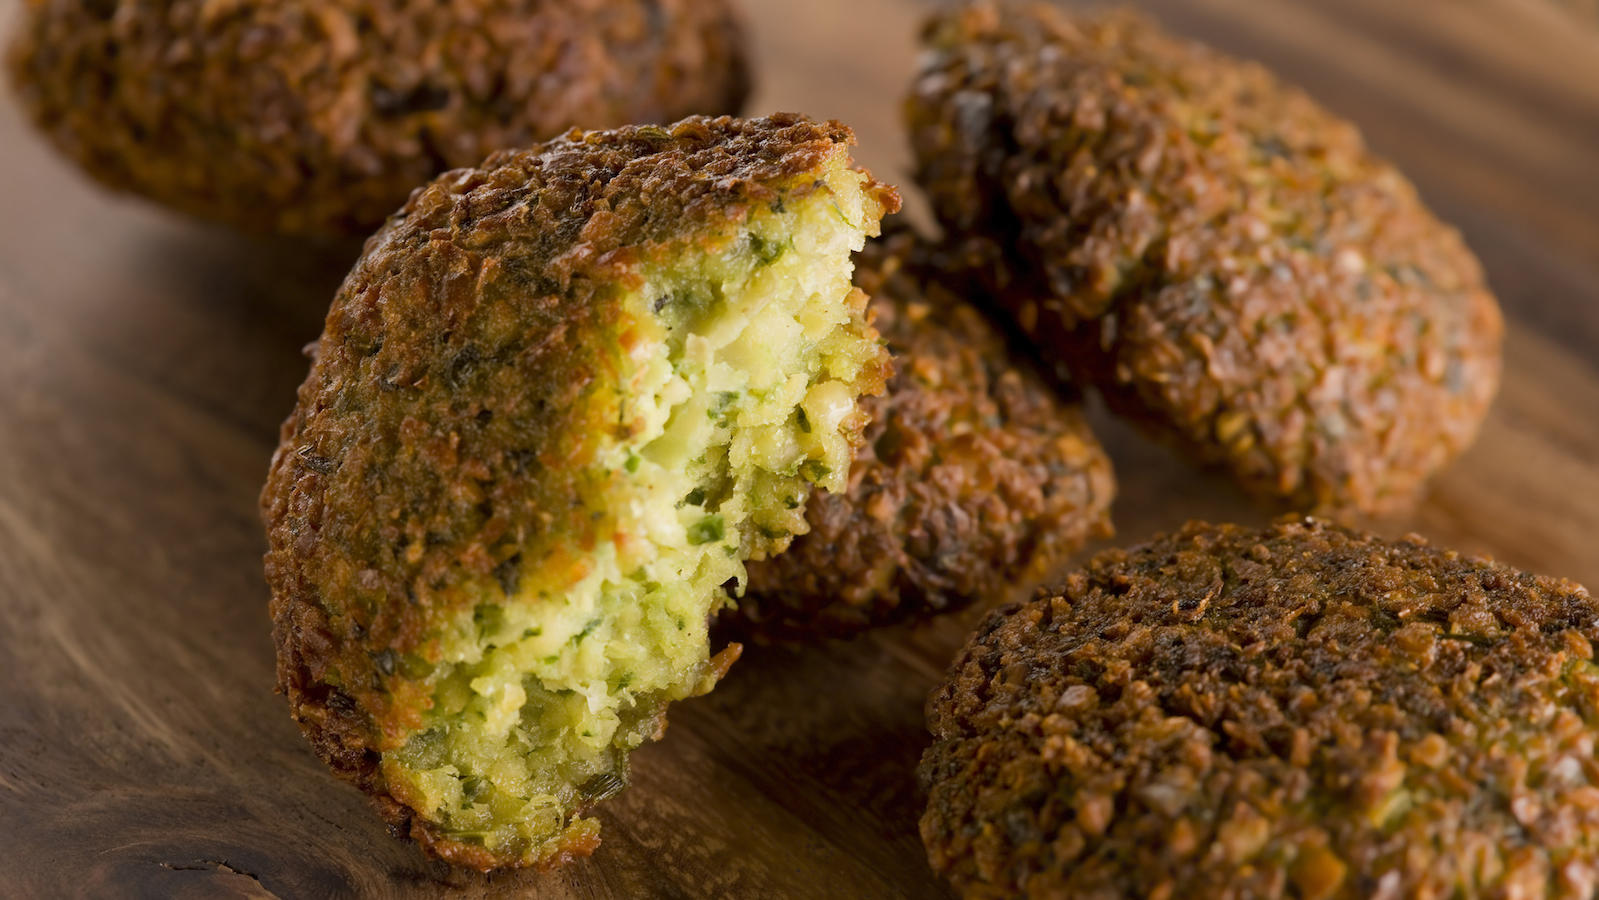 This International Cuisine Test Will Reveal Which Country You Actually Belong in Falafel